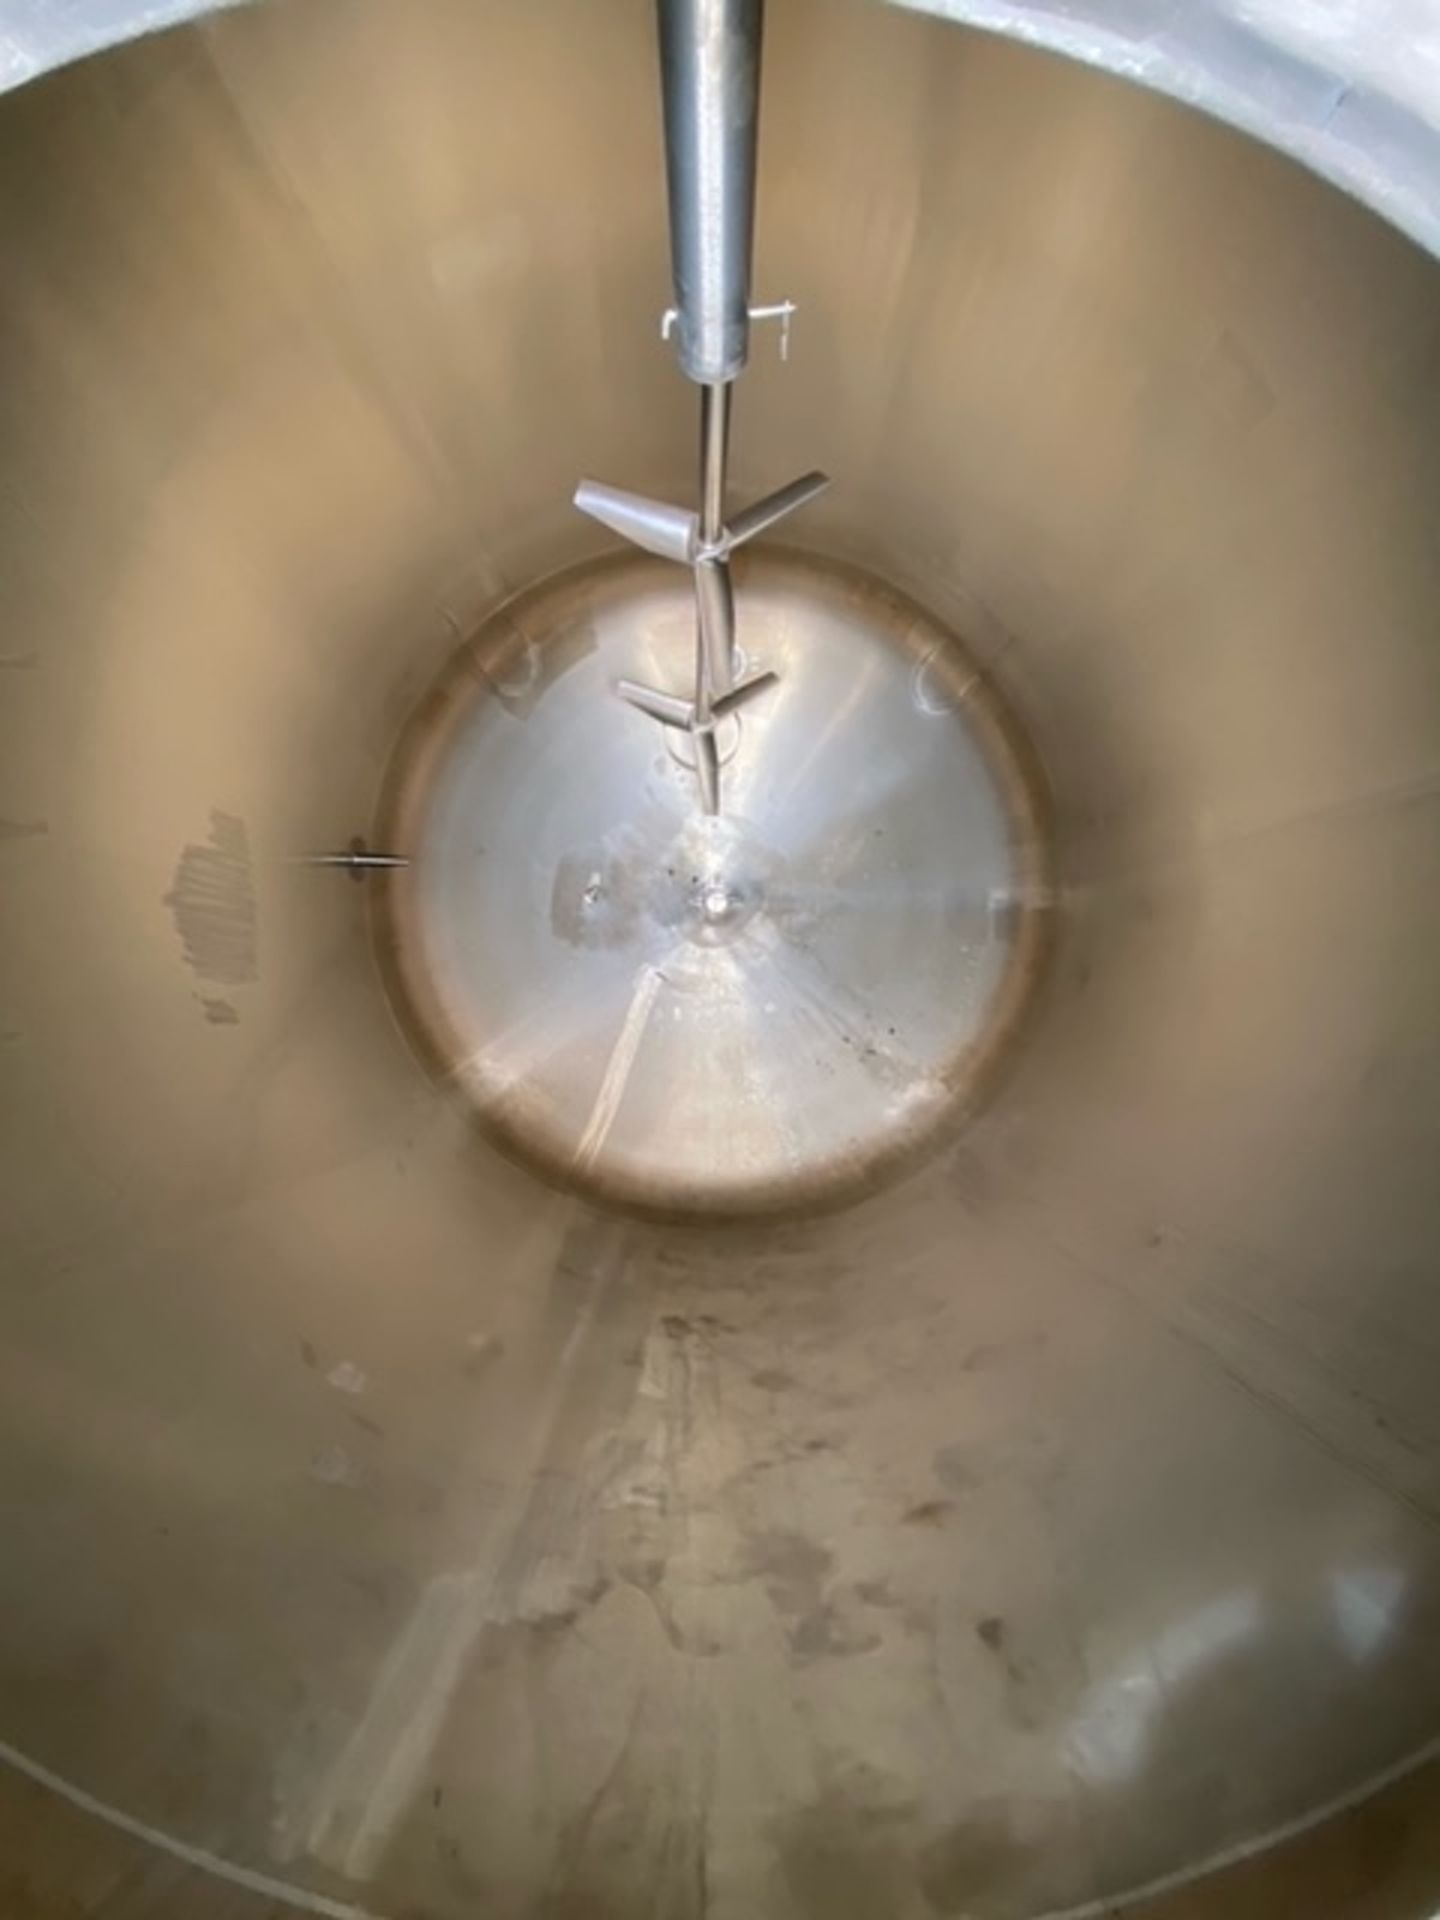 Precision Stainless Model V6575 N, 2000 Gallon, Jacketed Aseptic Surge Tank, Serial # 20017, Dome - Image 4 of 4